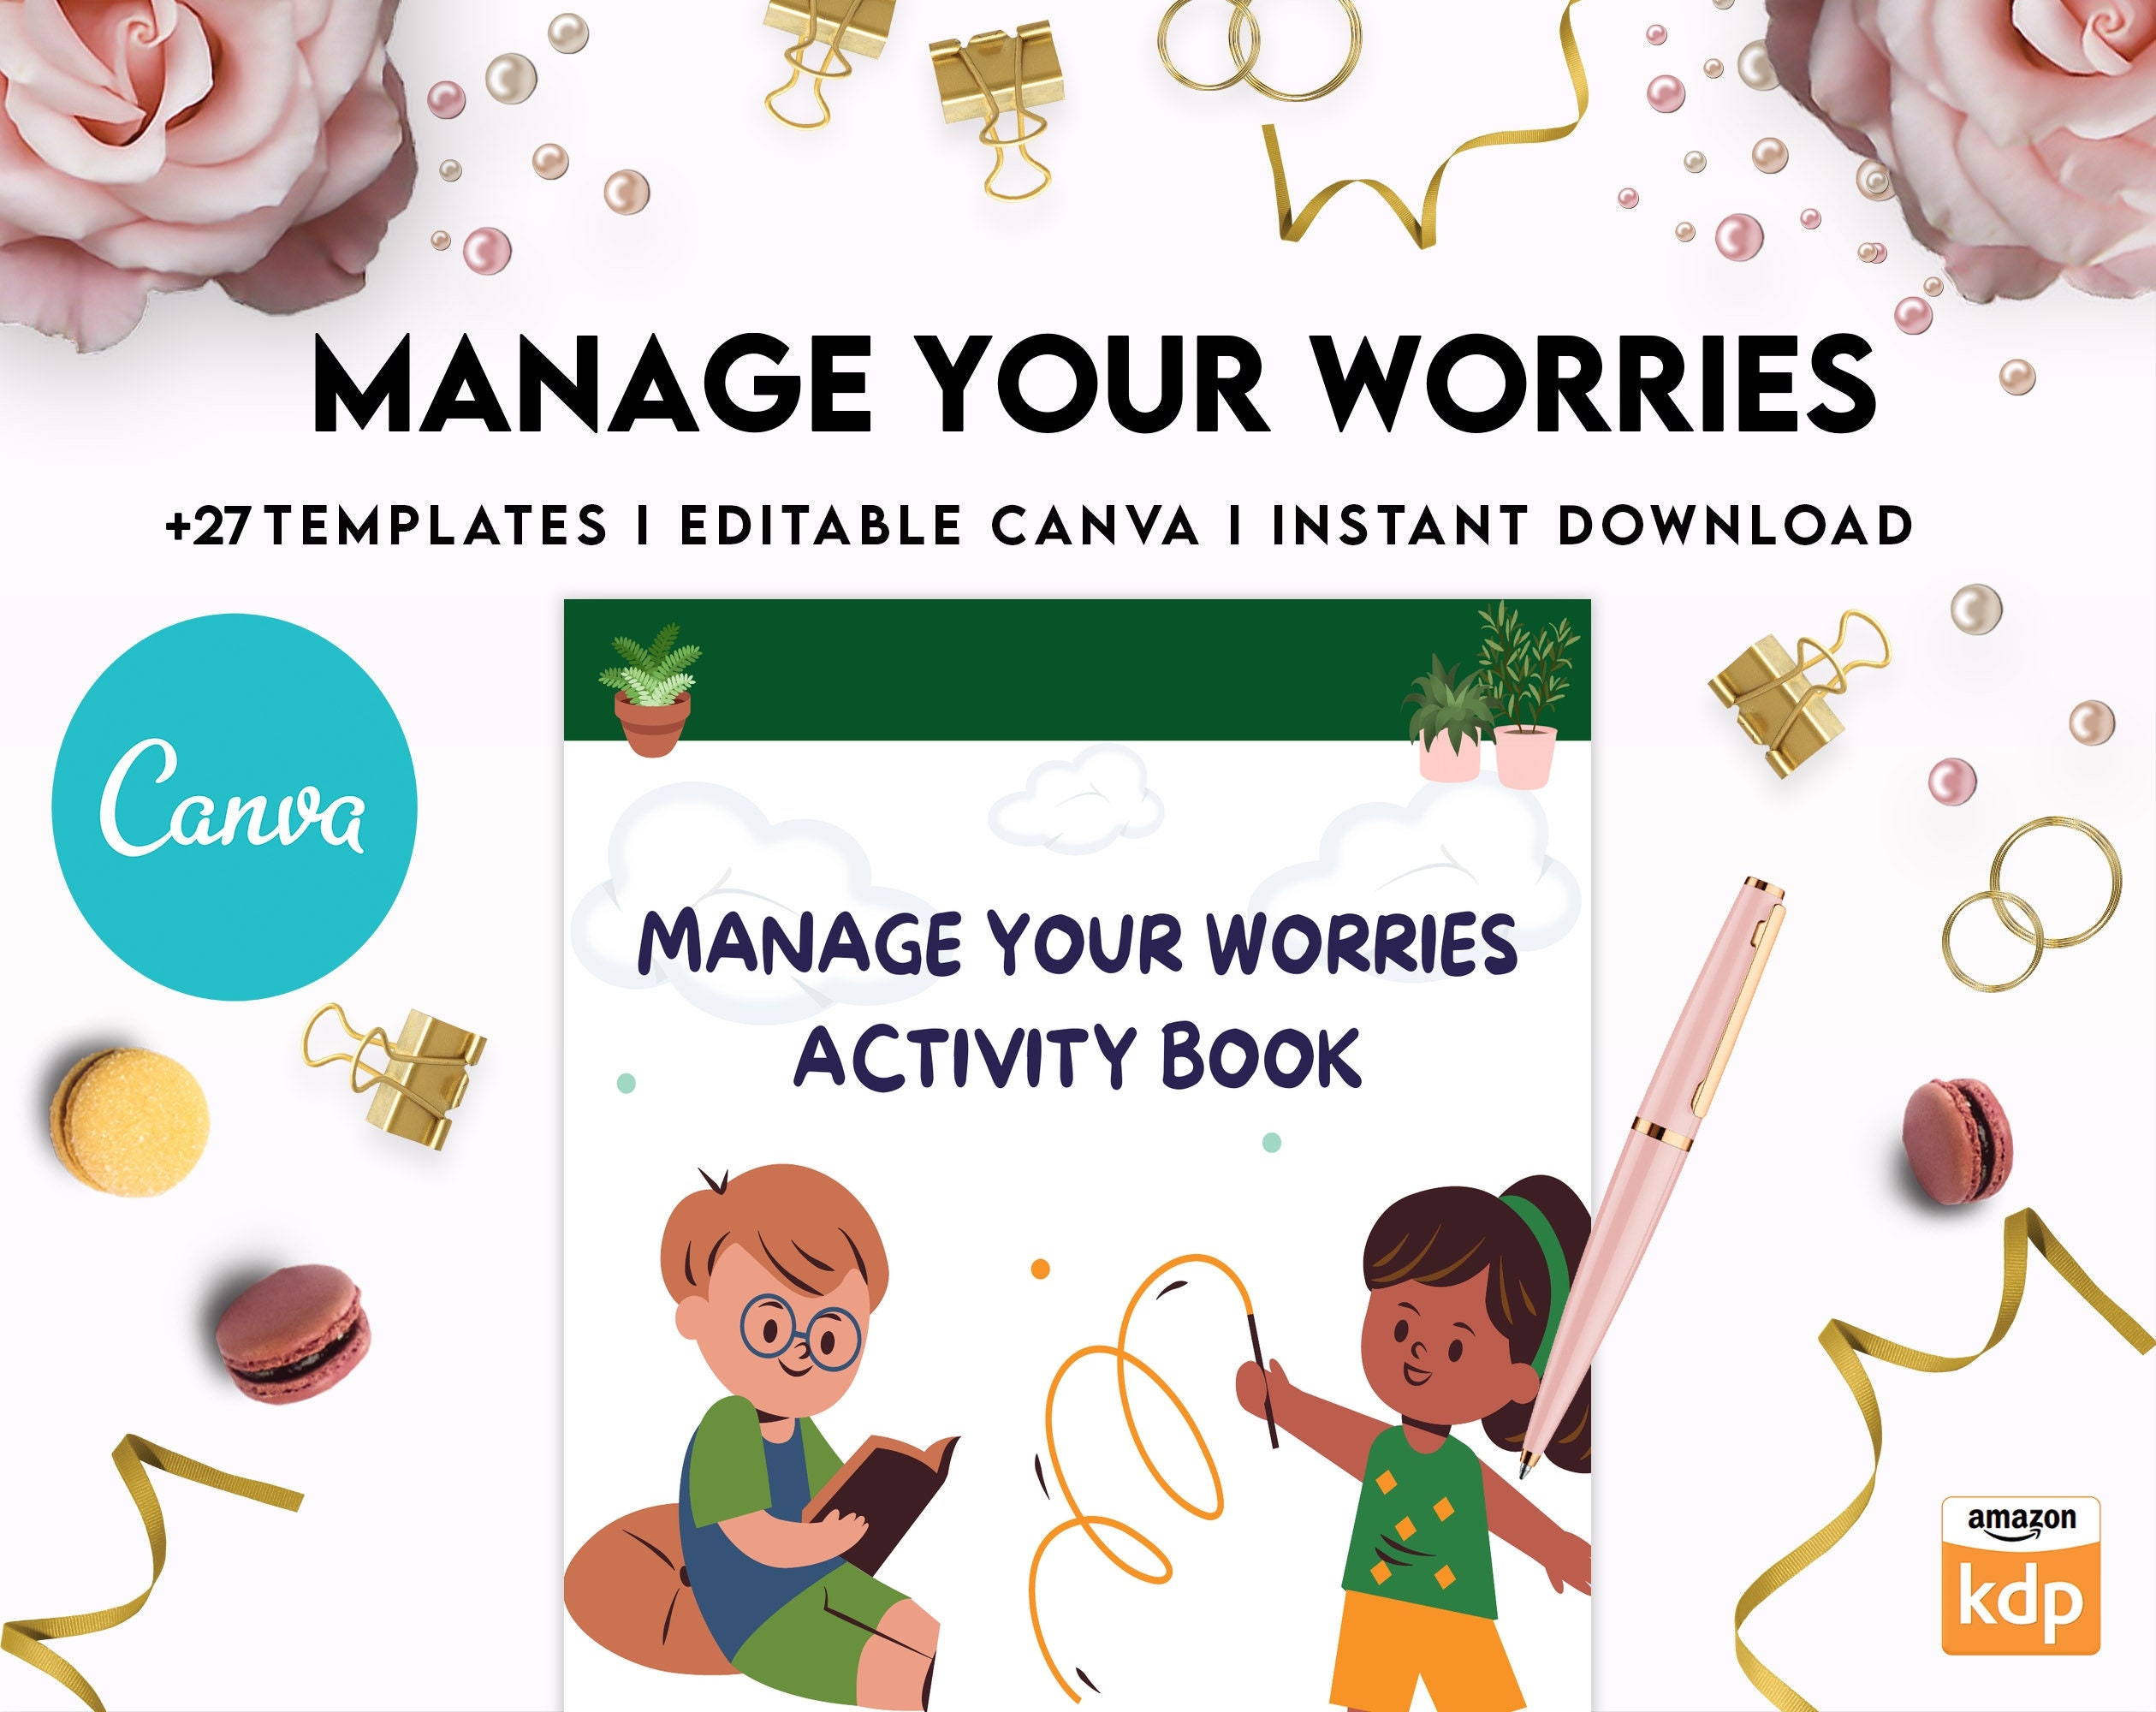 CBT Group Activities for kids Ages 8-12 CBT Worksheets, Anxiety Relief,  Therapy Resources, Therapy Worksheets, Social Anxiety, Social Psychology,  Therapy Tools - Planners weekly